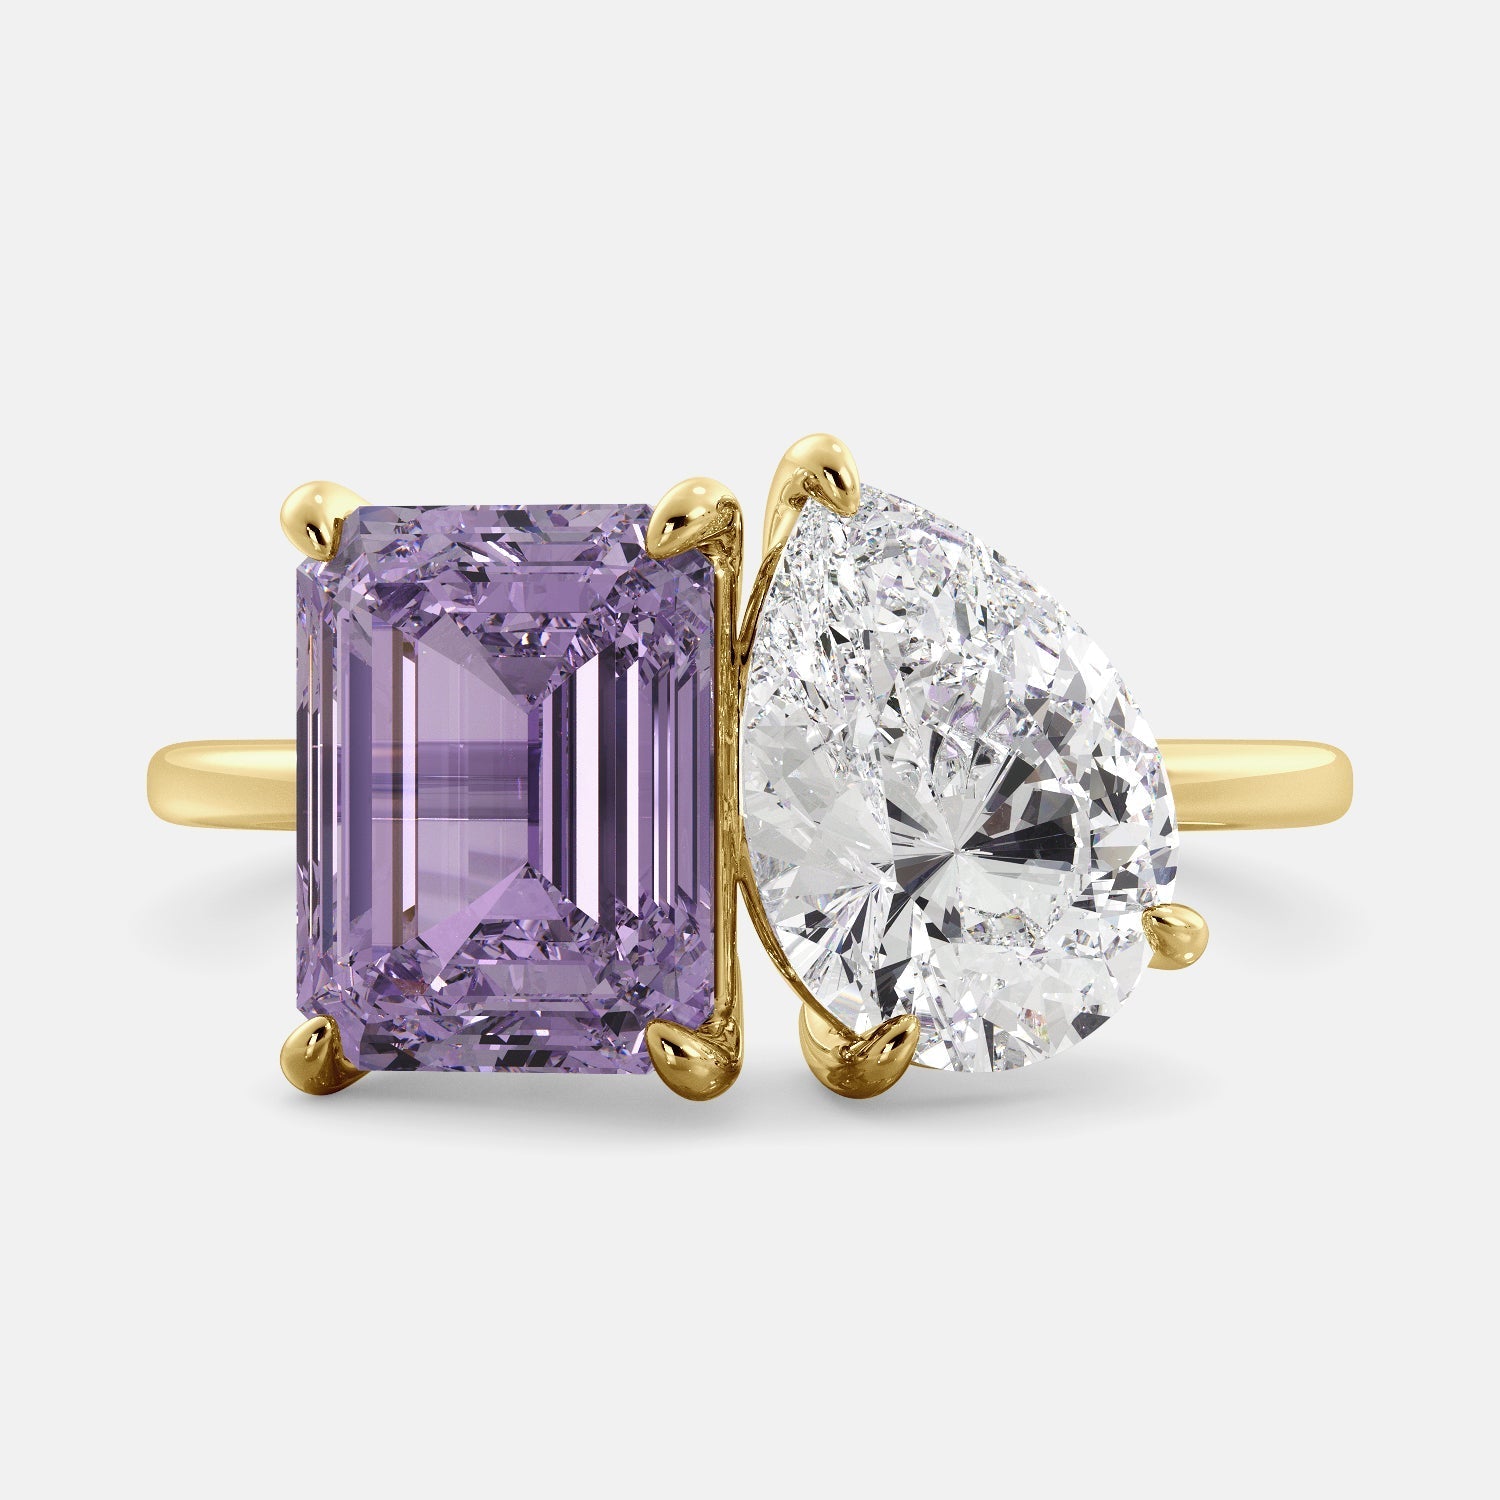 This image shows a toi et moi ring with a pear-shaped white topaz and an emerald-cut amethyst. The ring is set in a 14k yellow gold band and is available in all sizes. The amethyst is a purple gemstone that is said to promote peace, love, and harmony. The white topaz is a clear, colorless stone that is said to promote creativity, imagination, and self-expression. The toi et moi ring is a beautiful and unique way to show your love and commitment to someone special.